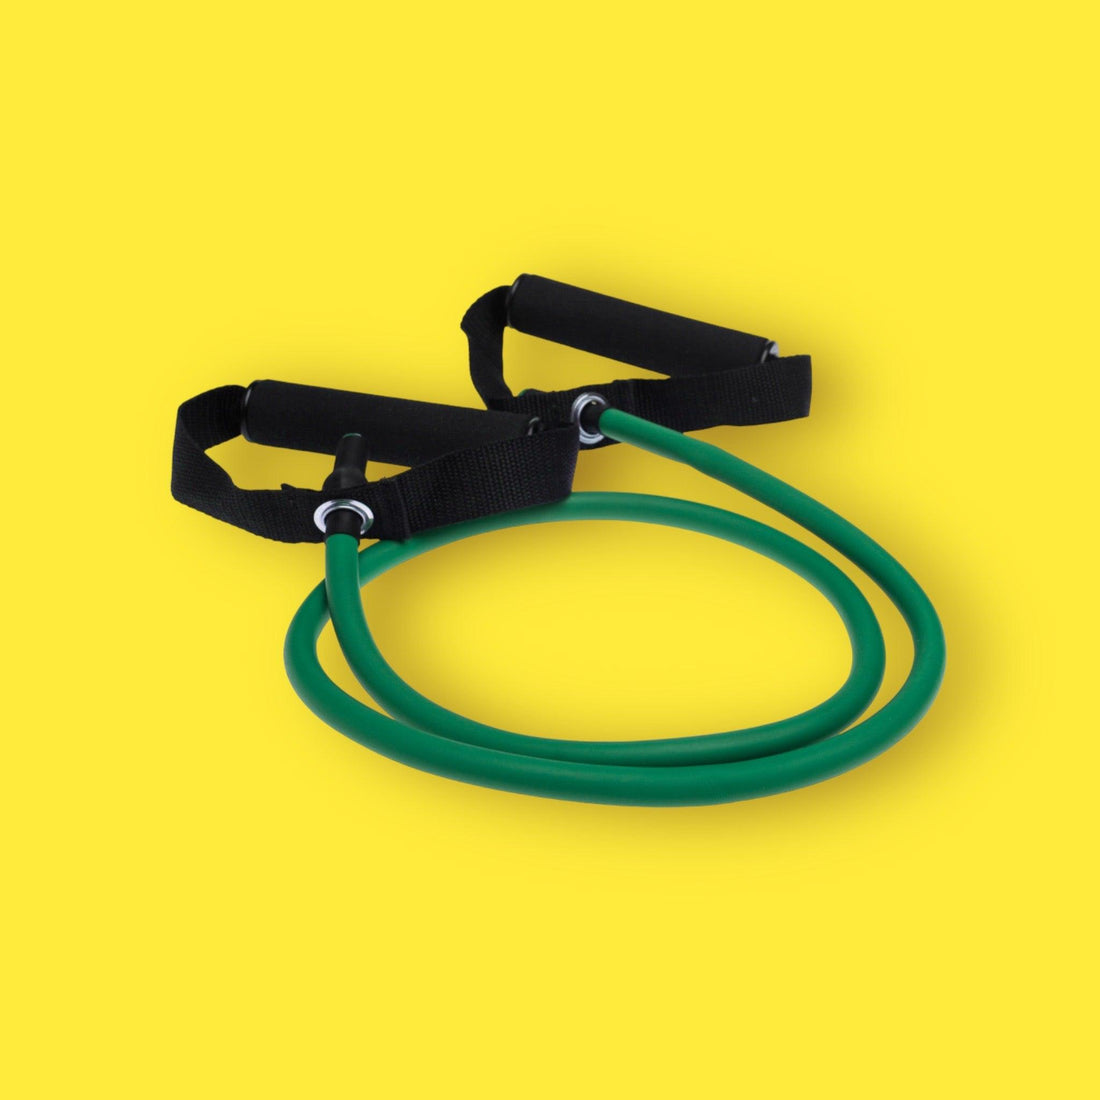 Whats the best elastic bands for fitness workouts 